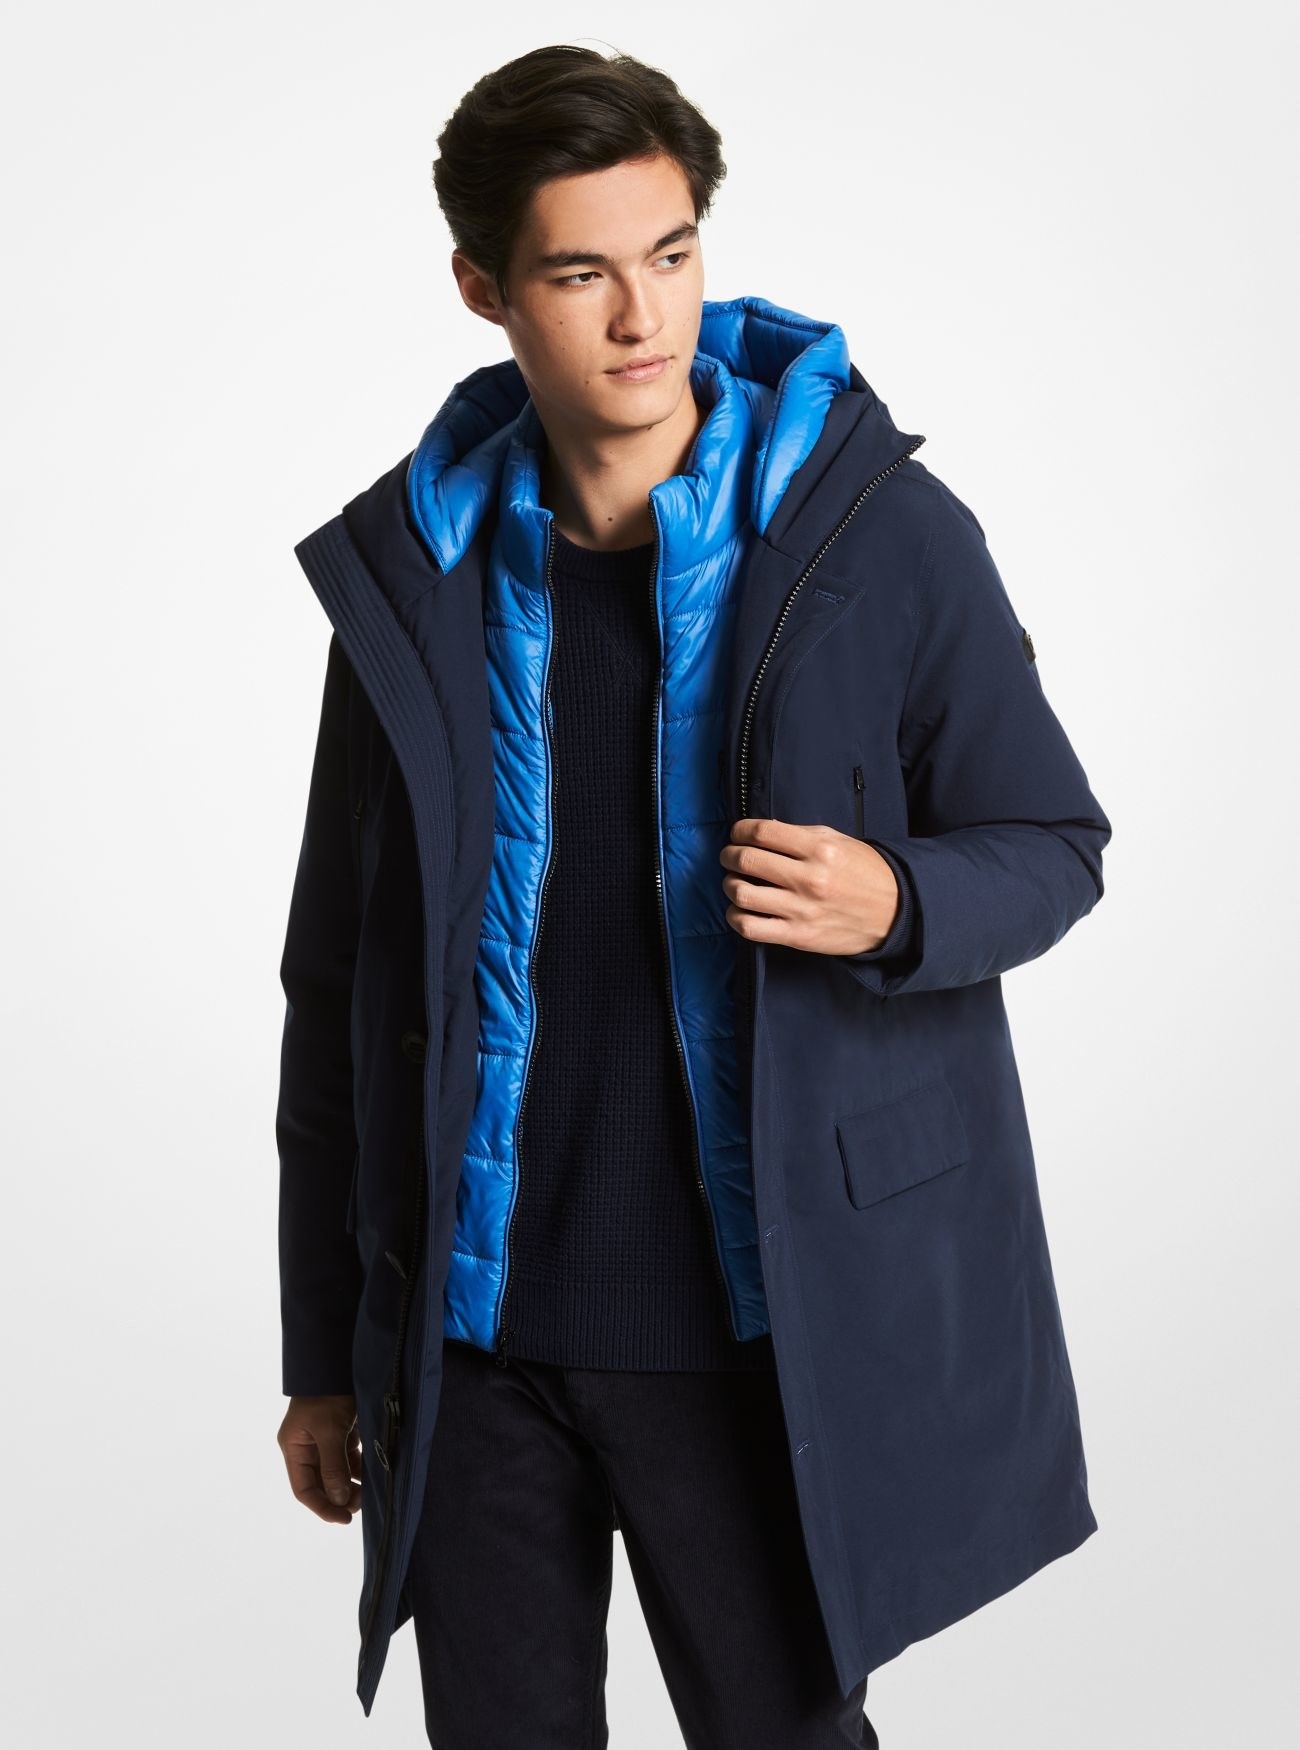 Model wearing a long navy coat with a lighter blue quilted lining